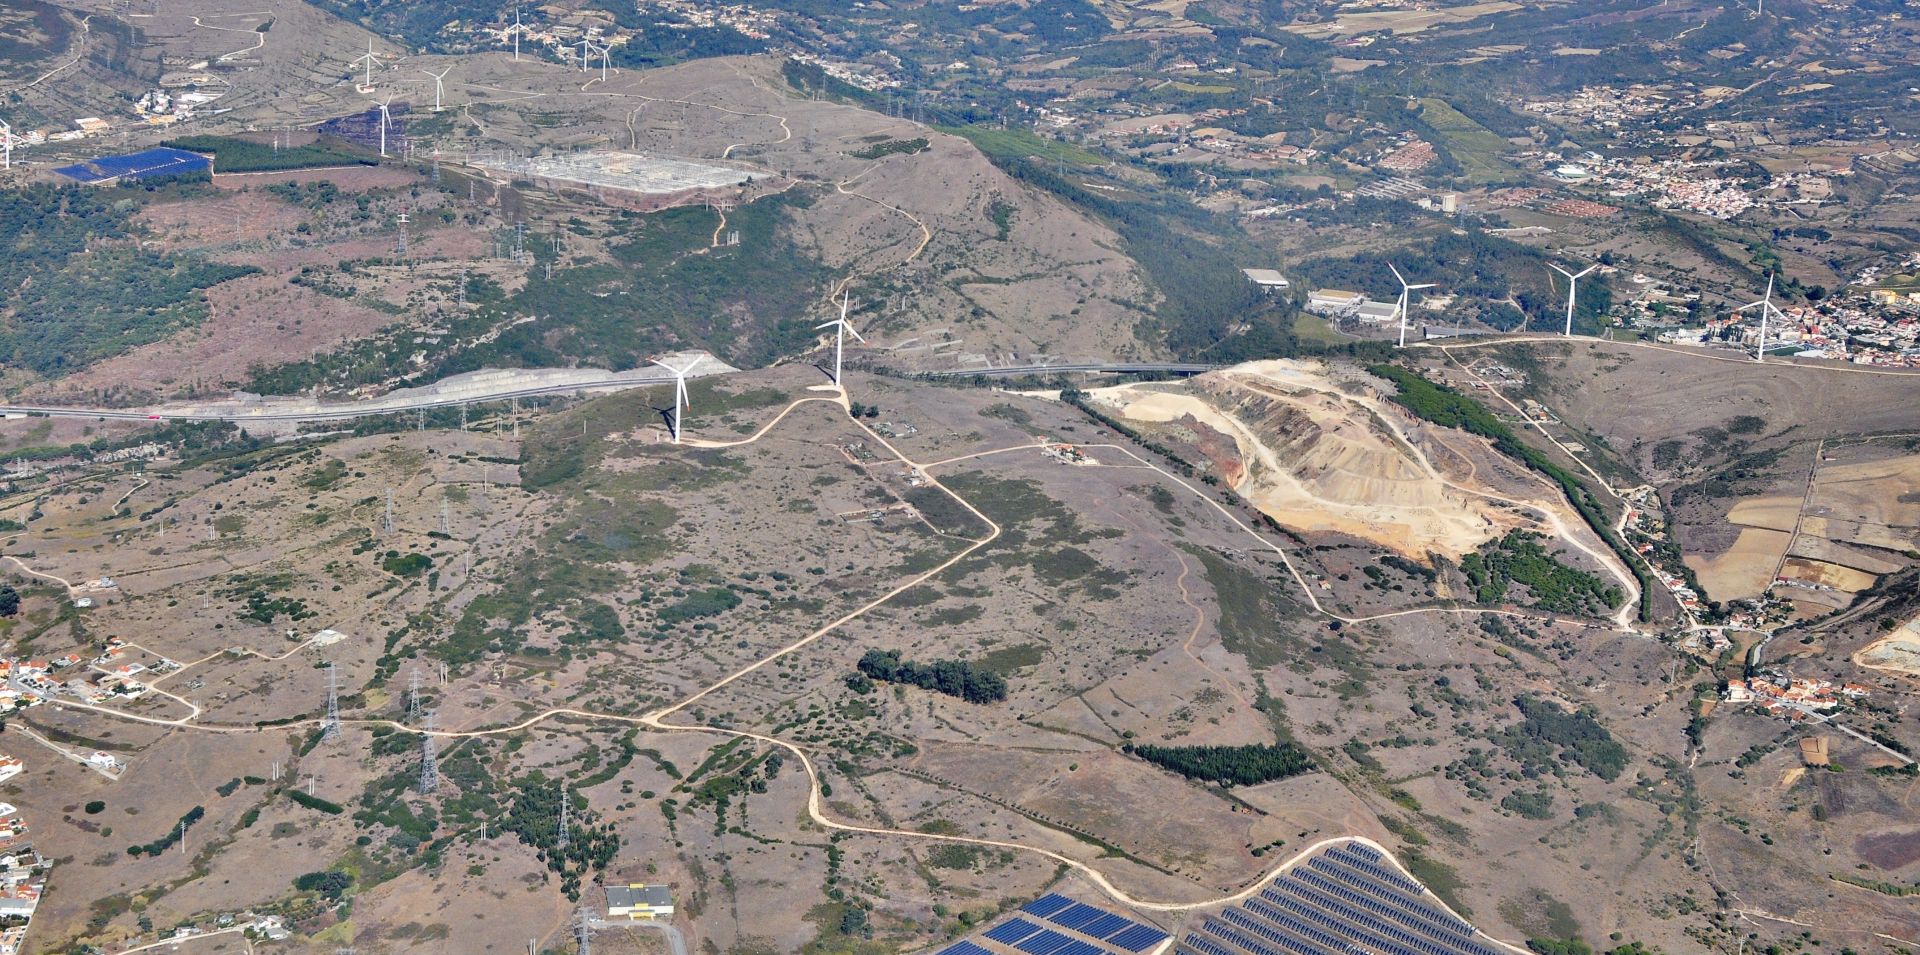 View from the air of Portugese countryside with solar panels and wind turbines